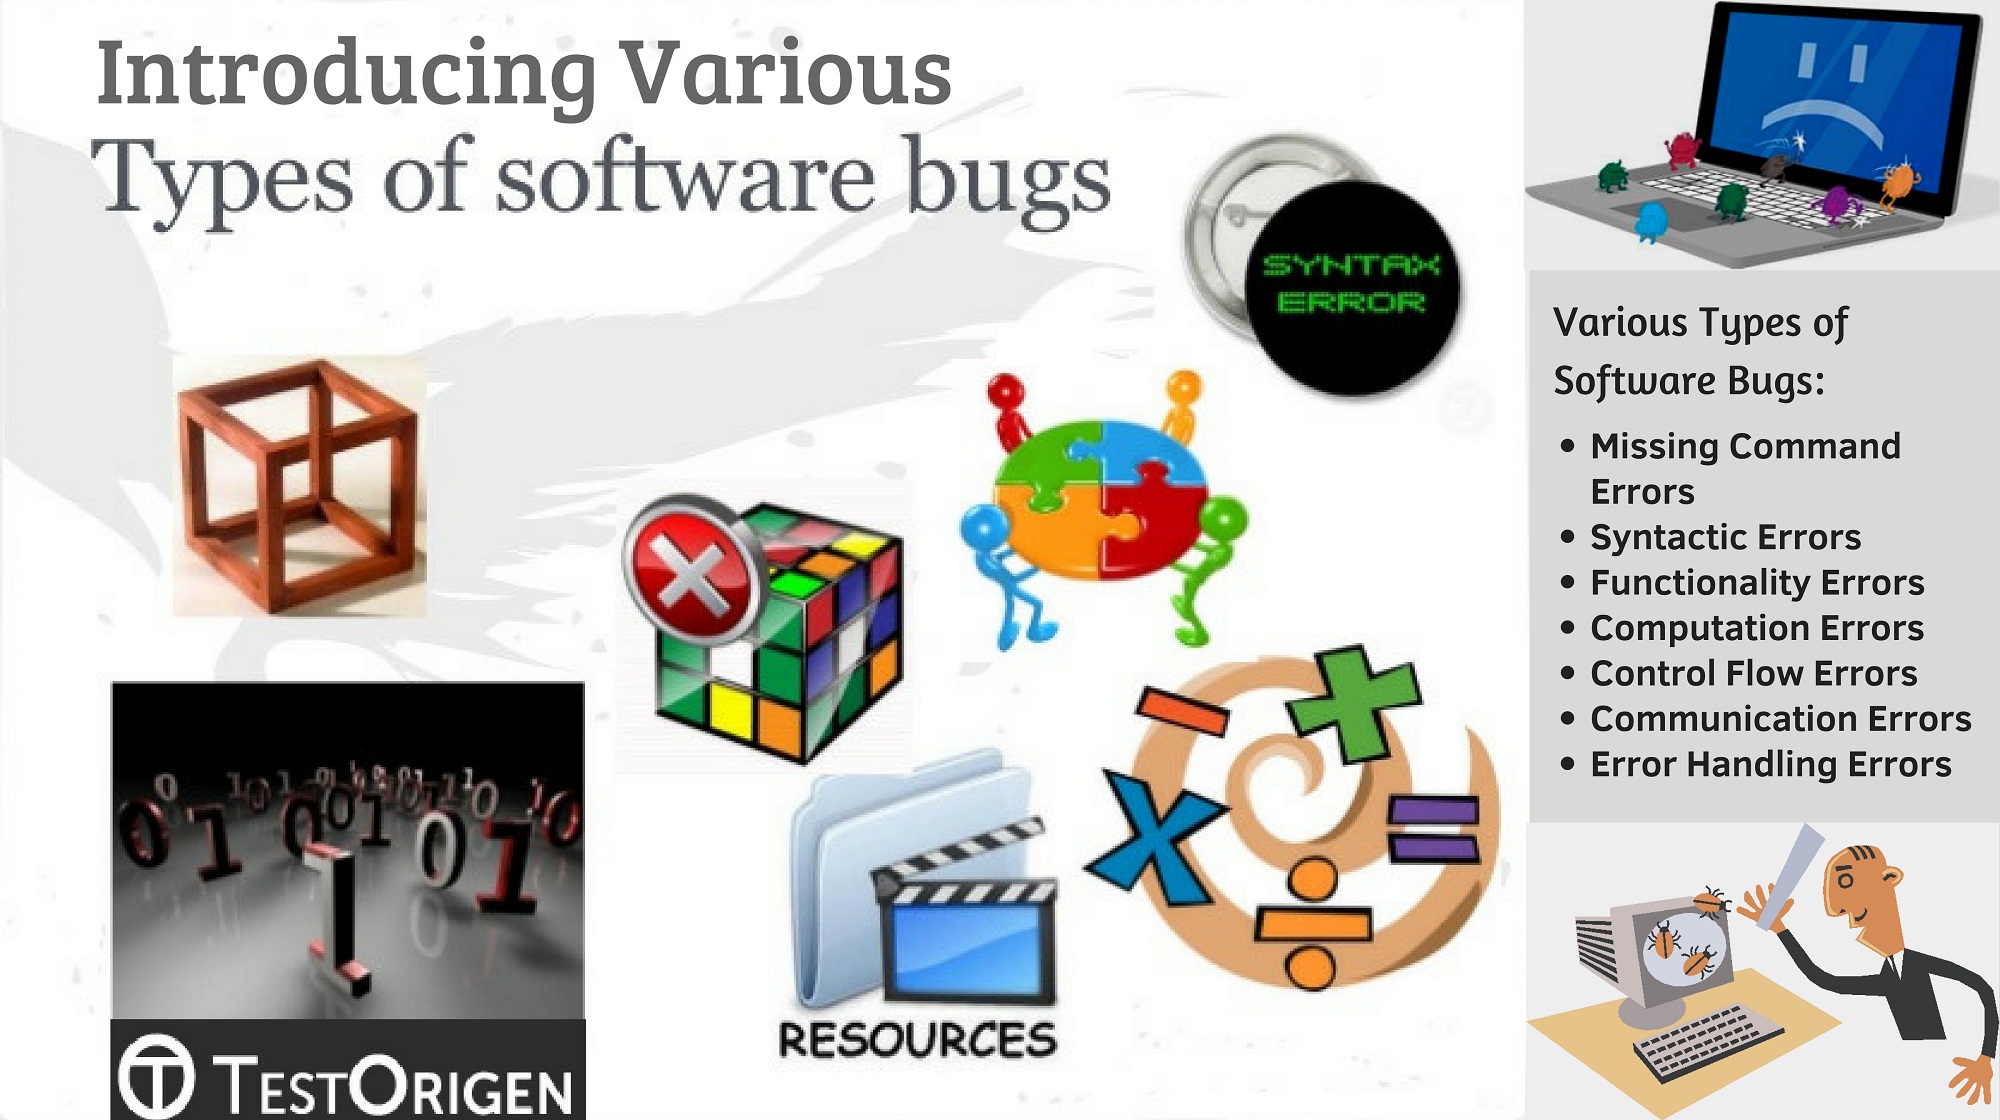 Introducing Various Types of Software Bugs